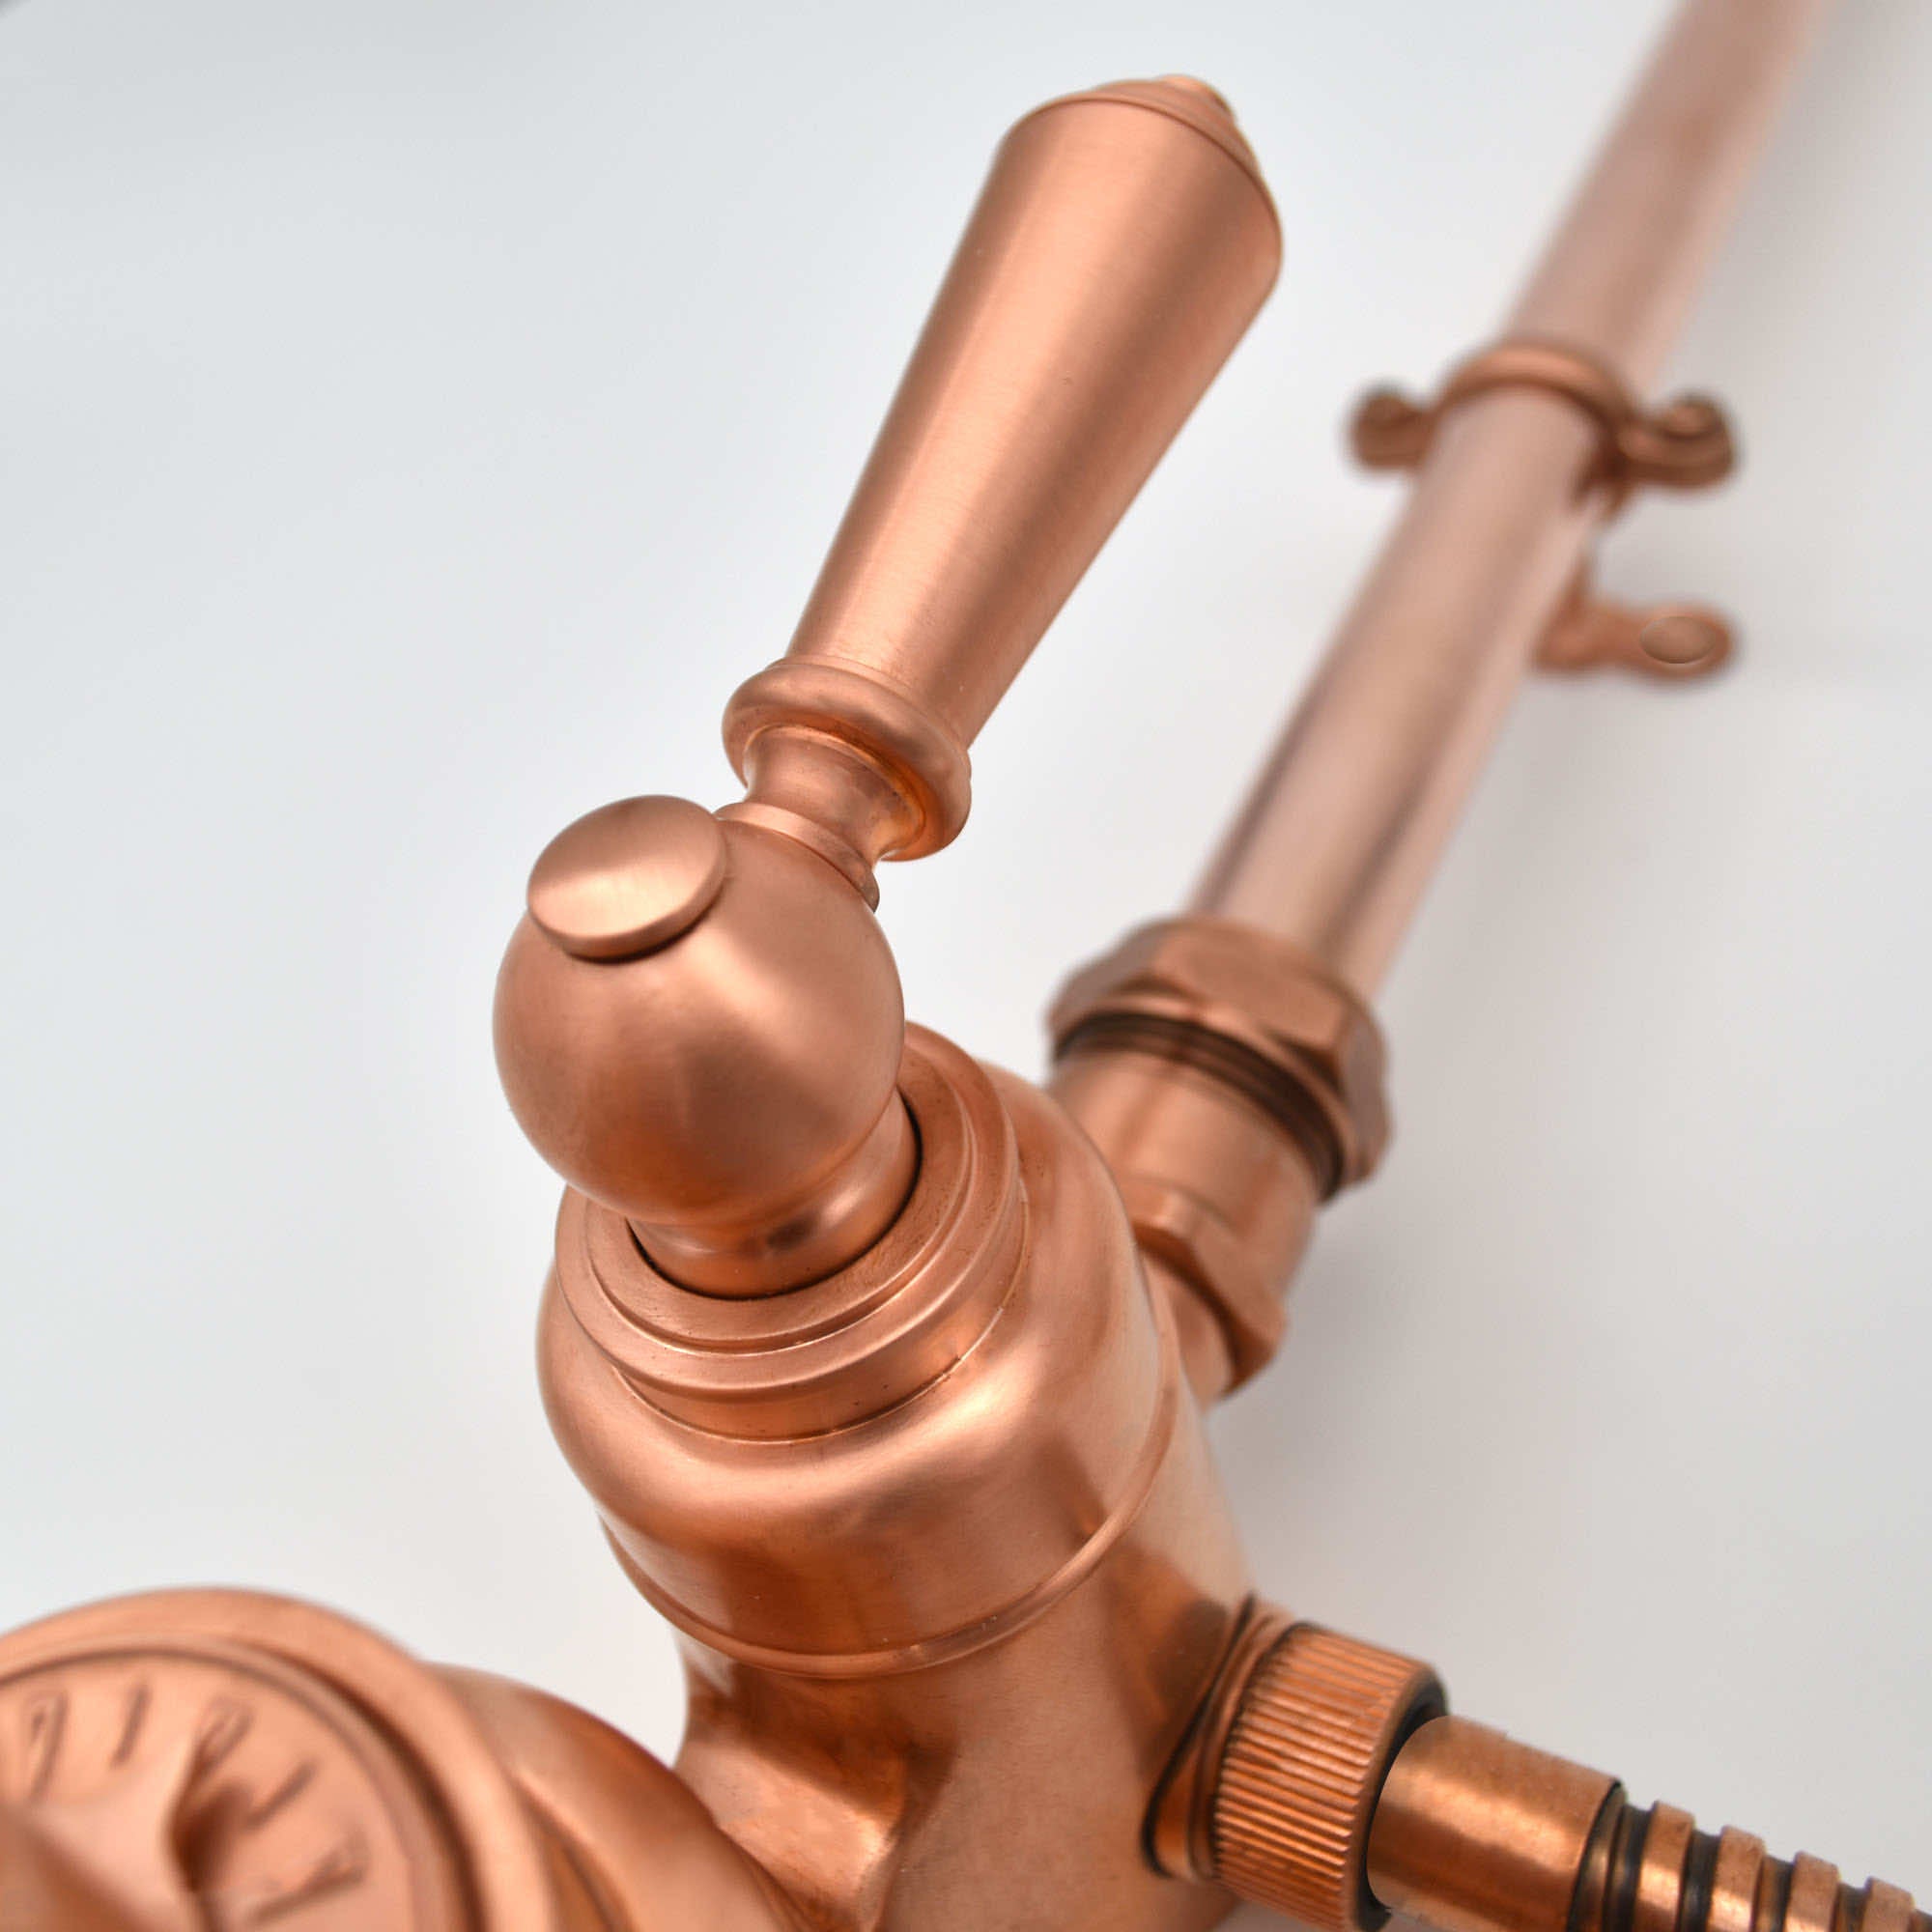 Copper valve with sleek and sophisticated design for a luxurious shower experience - copper lever handle finish